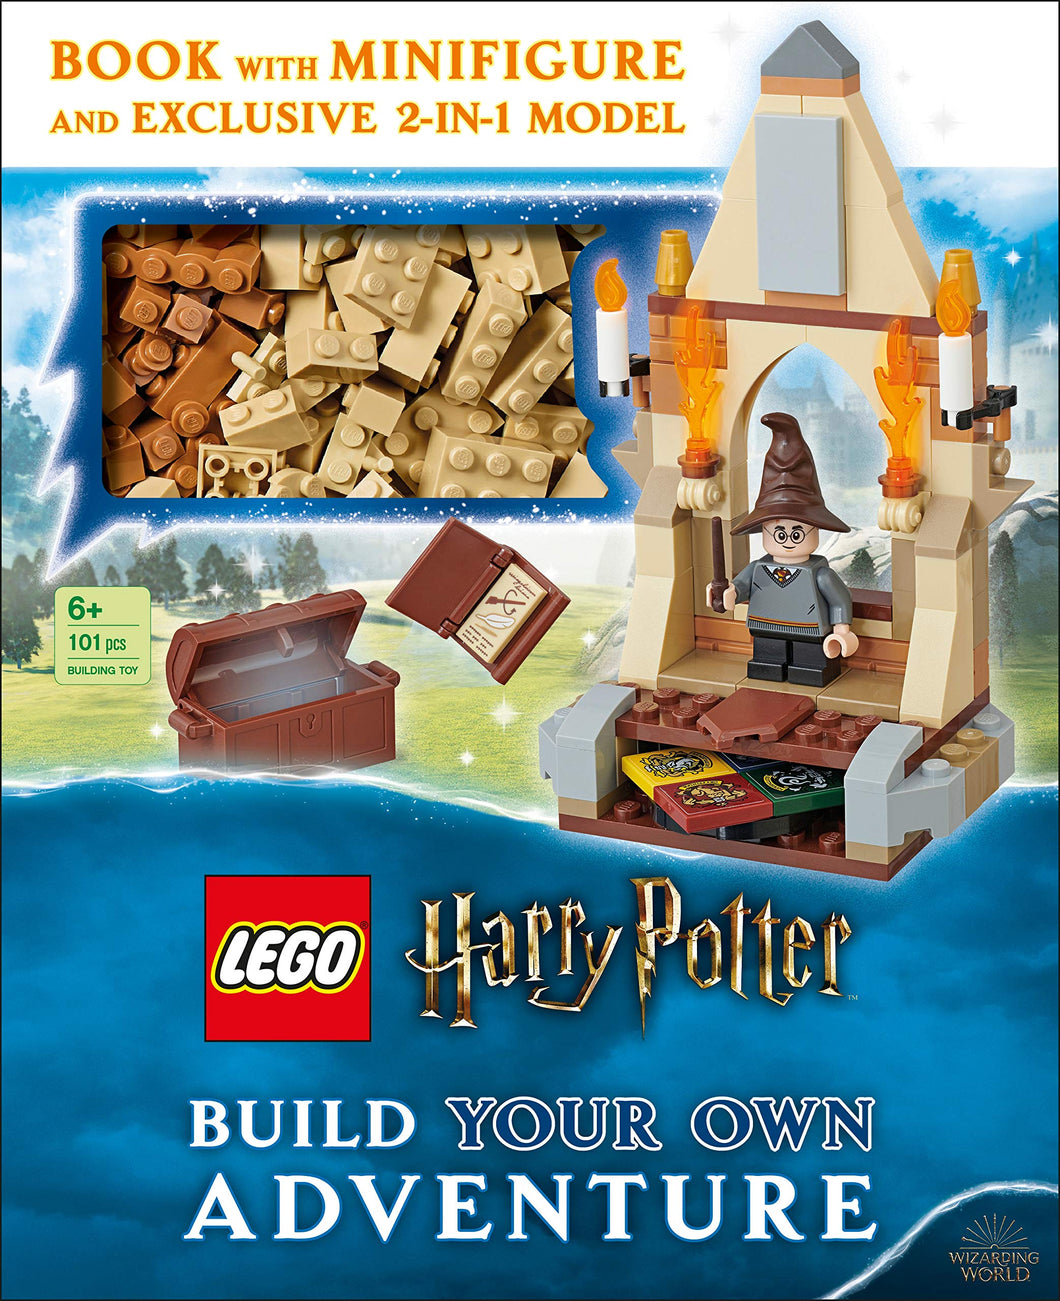 LEGO© Harry Potter™ Build Your Own Adventure (with Harry Potter Minifigure and Exclusive Model)